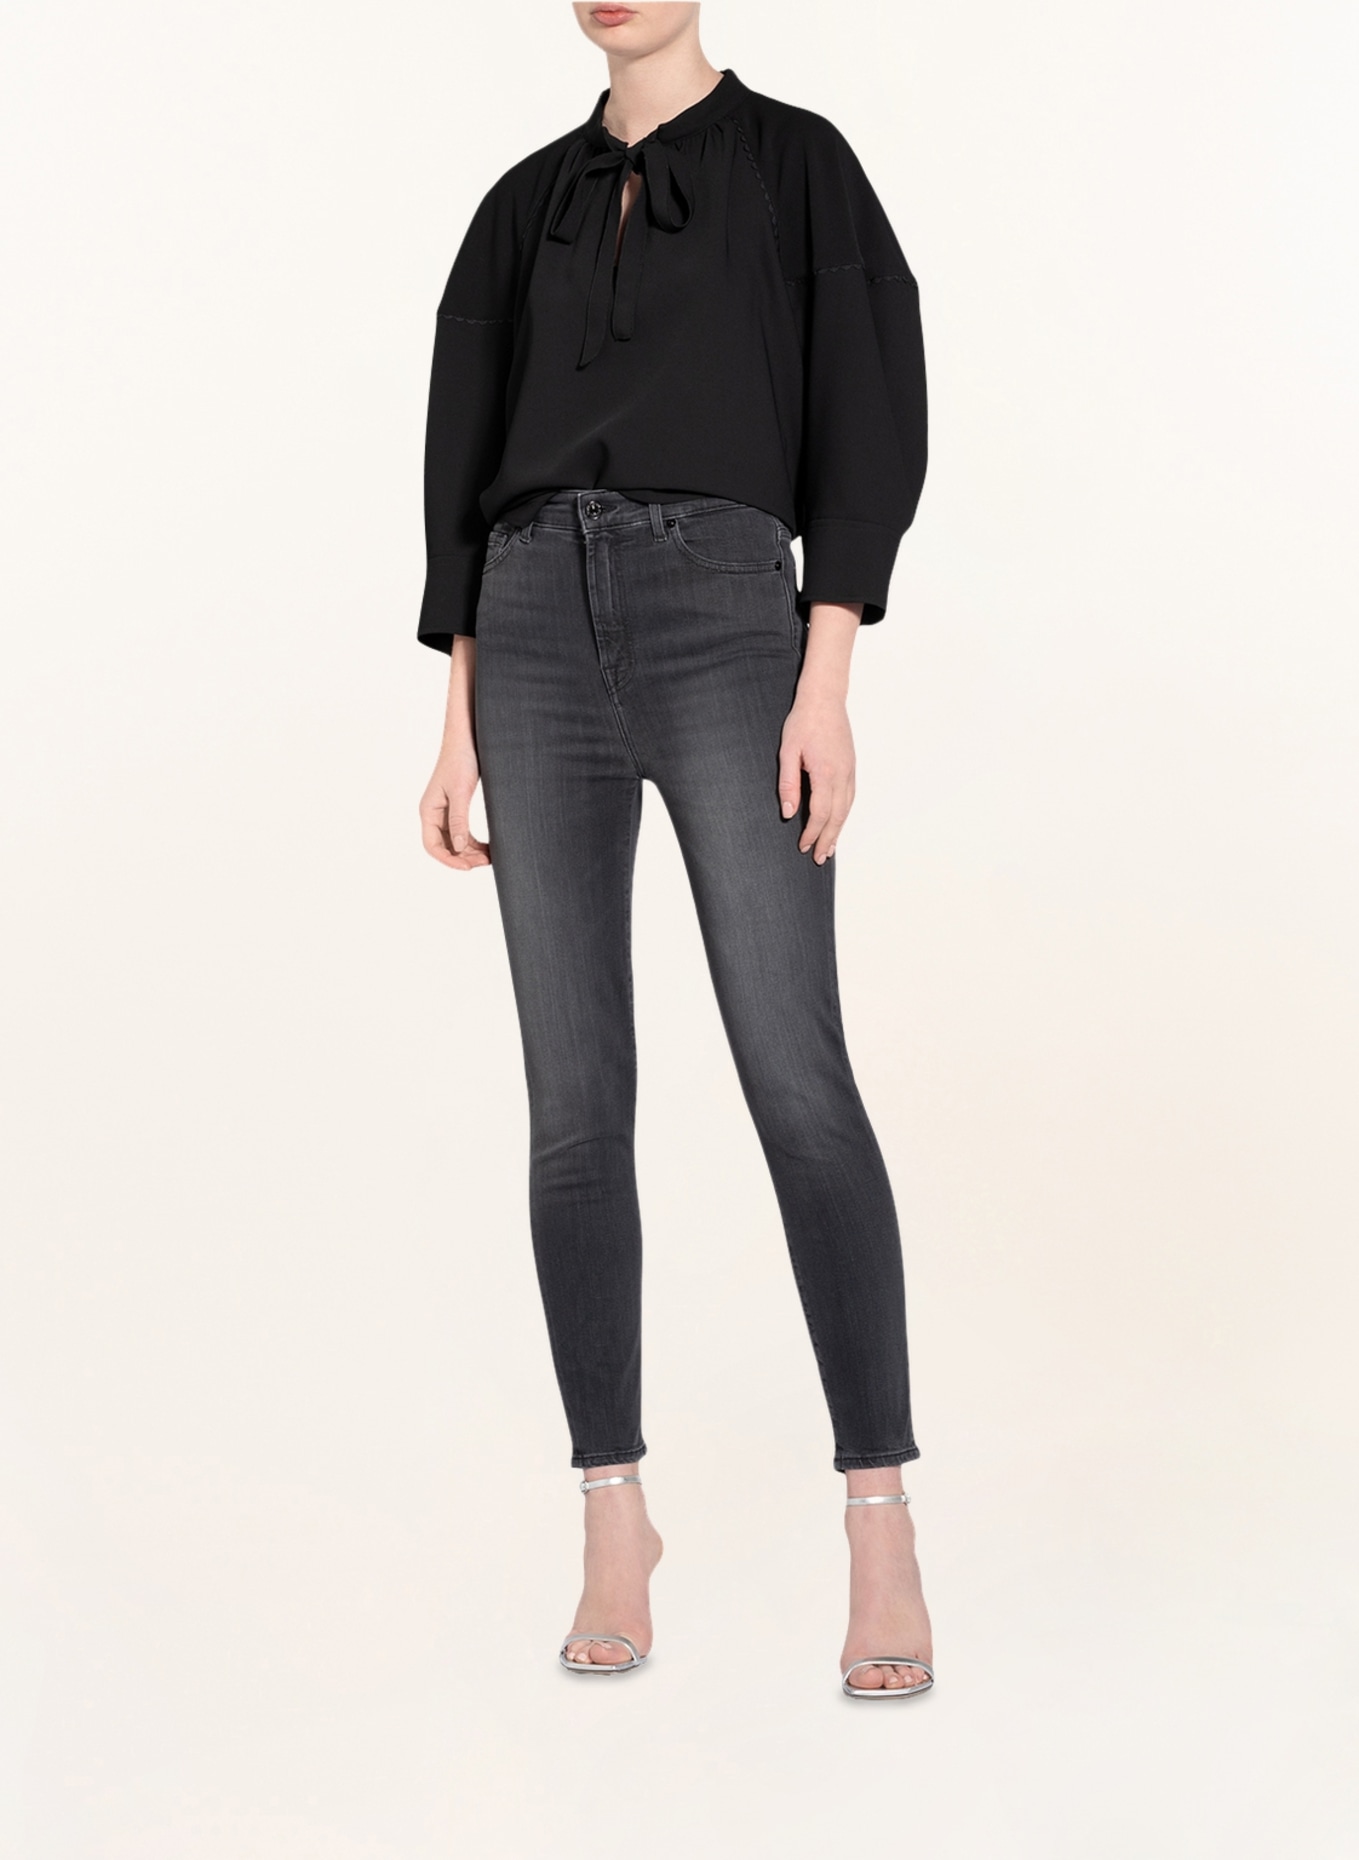 7 For All Mankind Skinny Slim Illusion Luxe Jeans, Rinse Black at